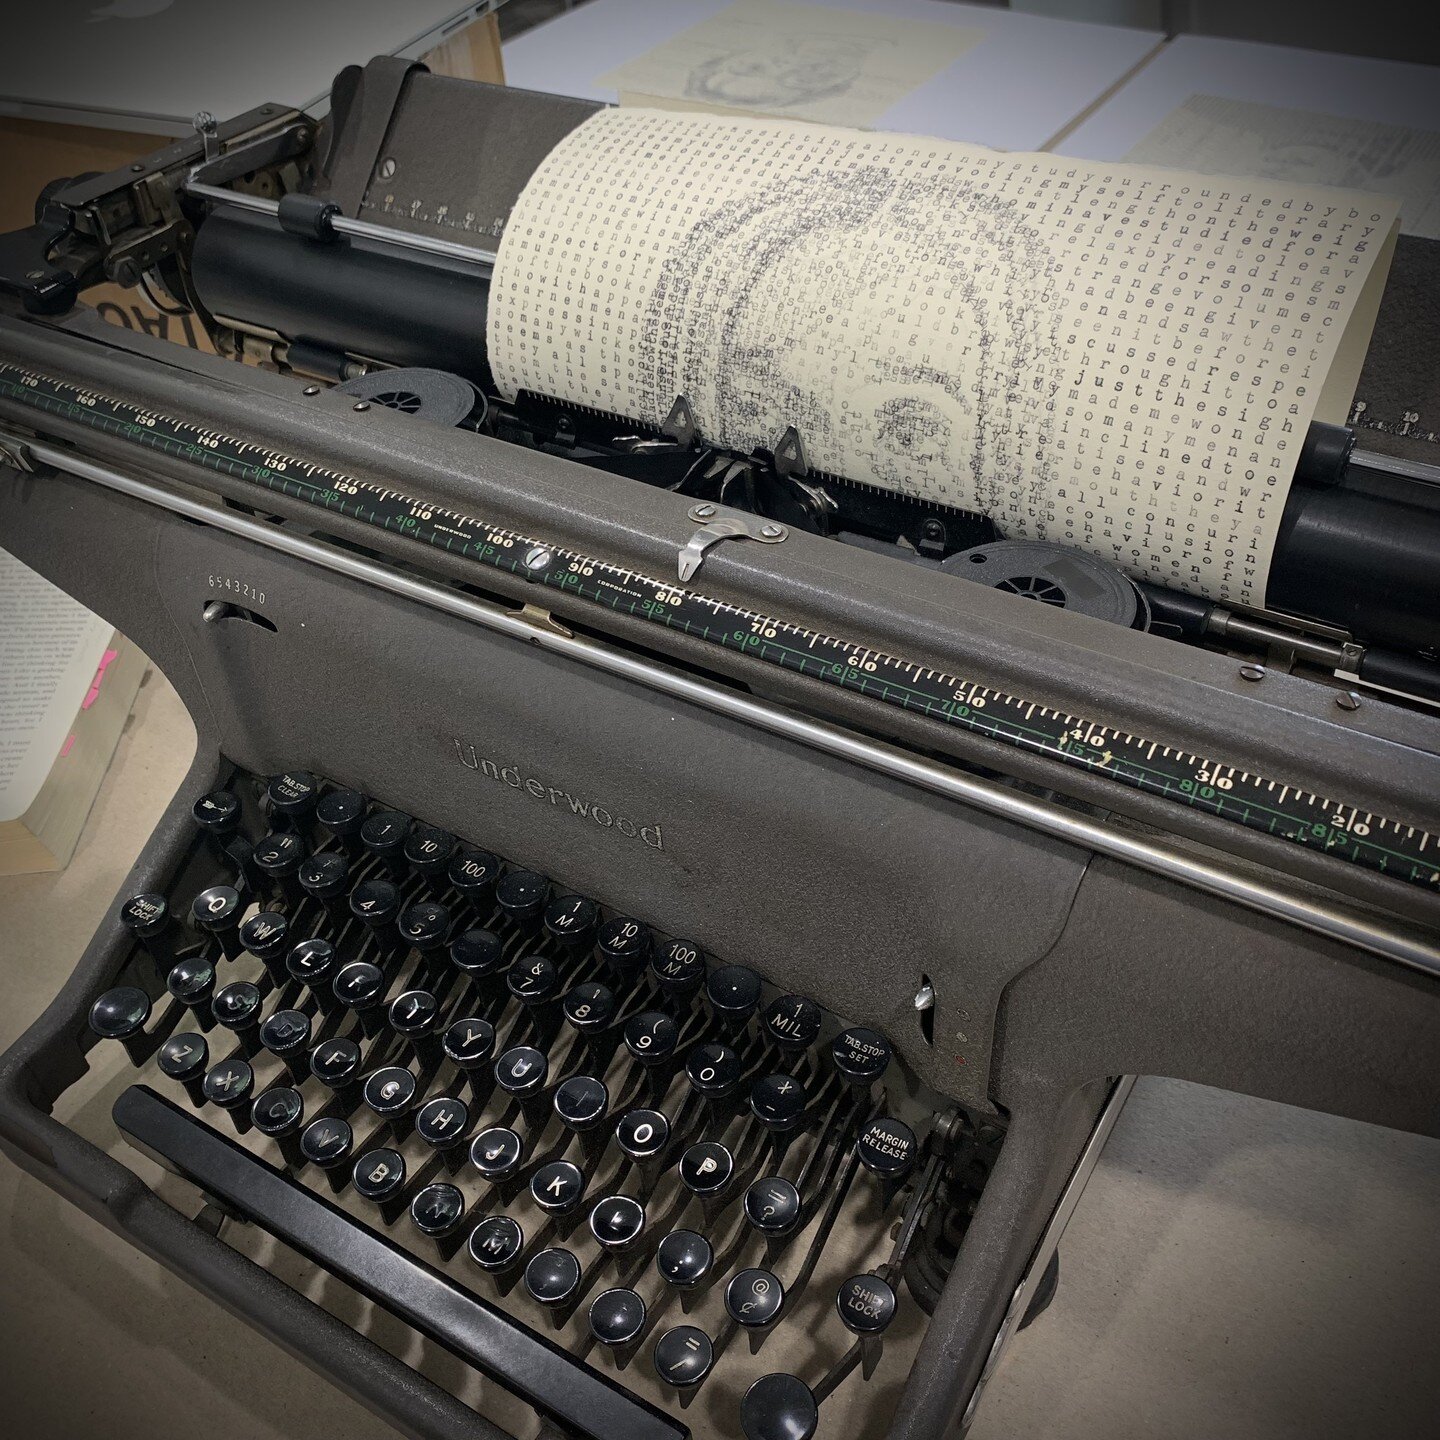 Meet Gwen. She is an Underwood typewriter with an extended carriage, named after the British painter Gwen John. She is my workhorse. 

Come play with me and Gwen this summer at Arrowmont! I will have several typewriters for you to try during a weeklo